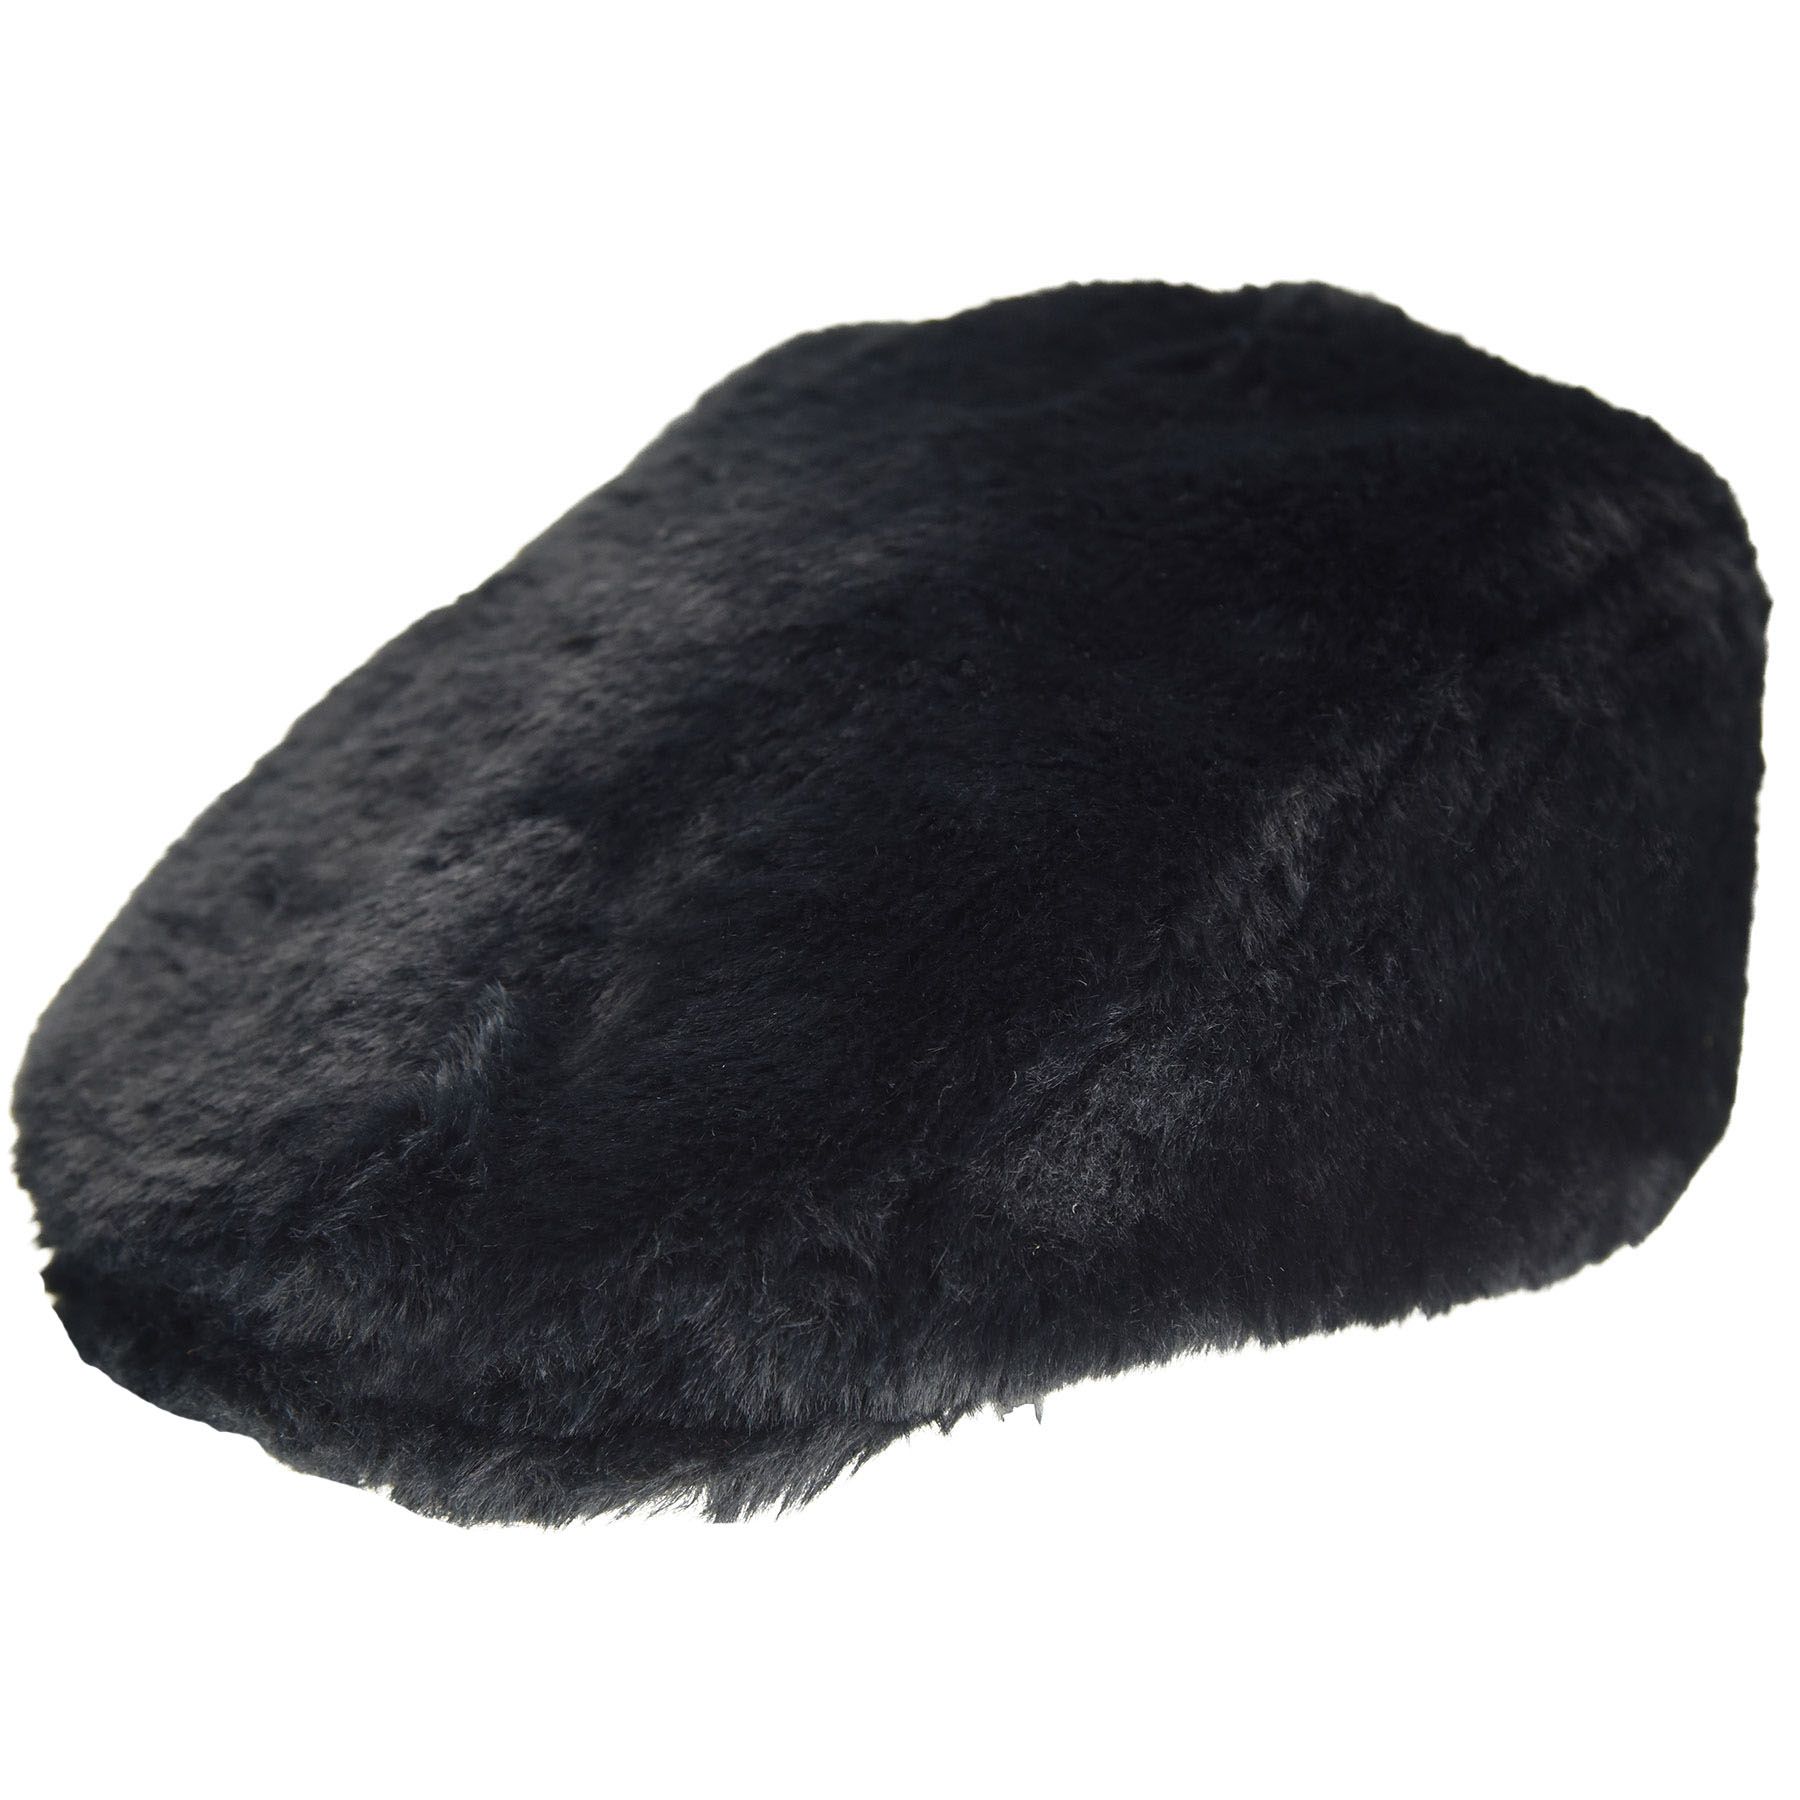 black and white fur hat